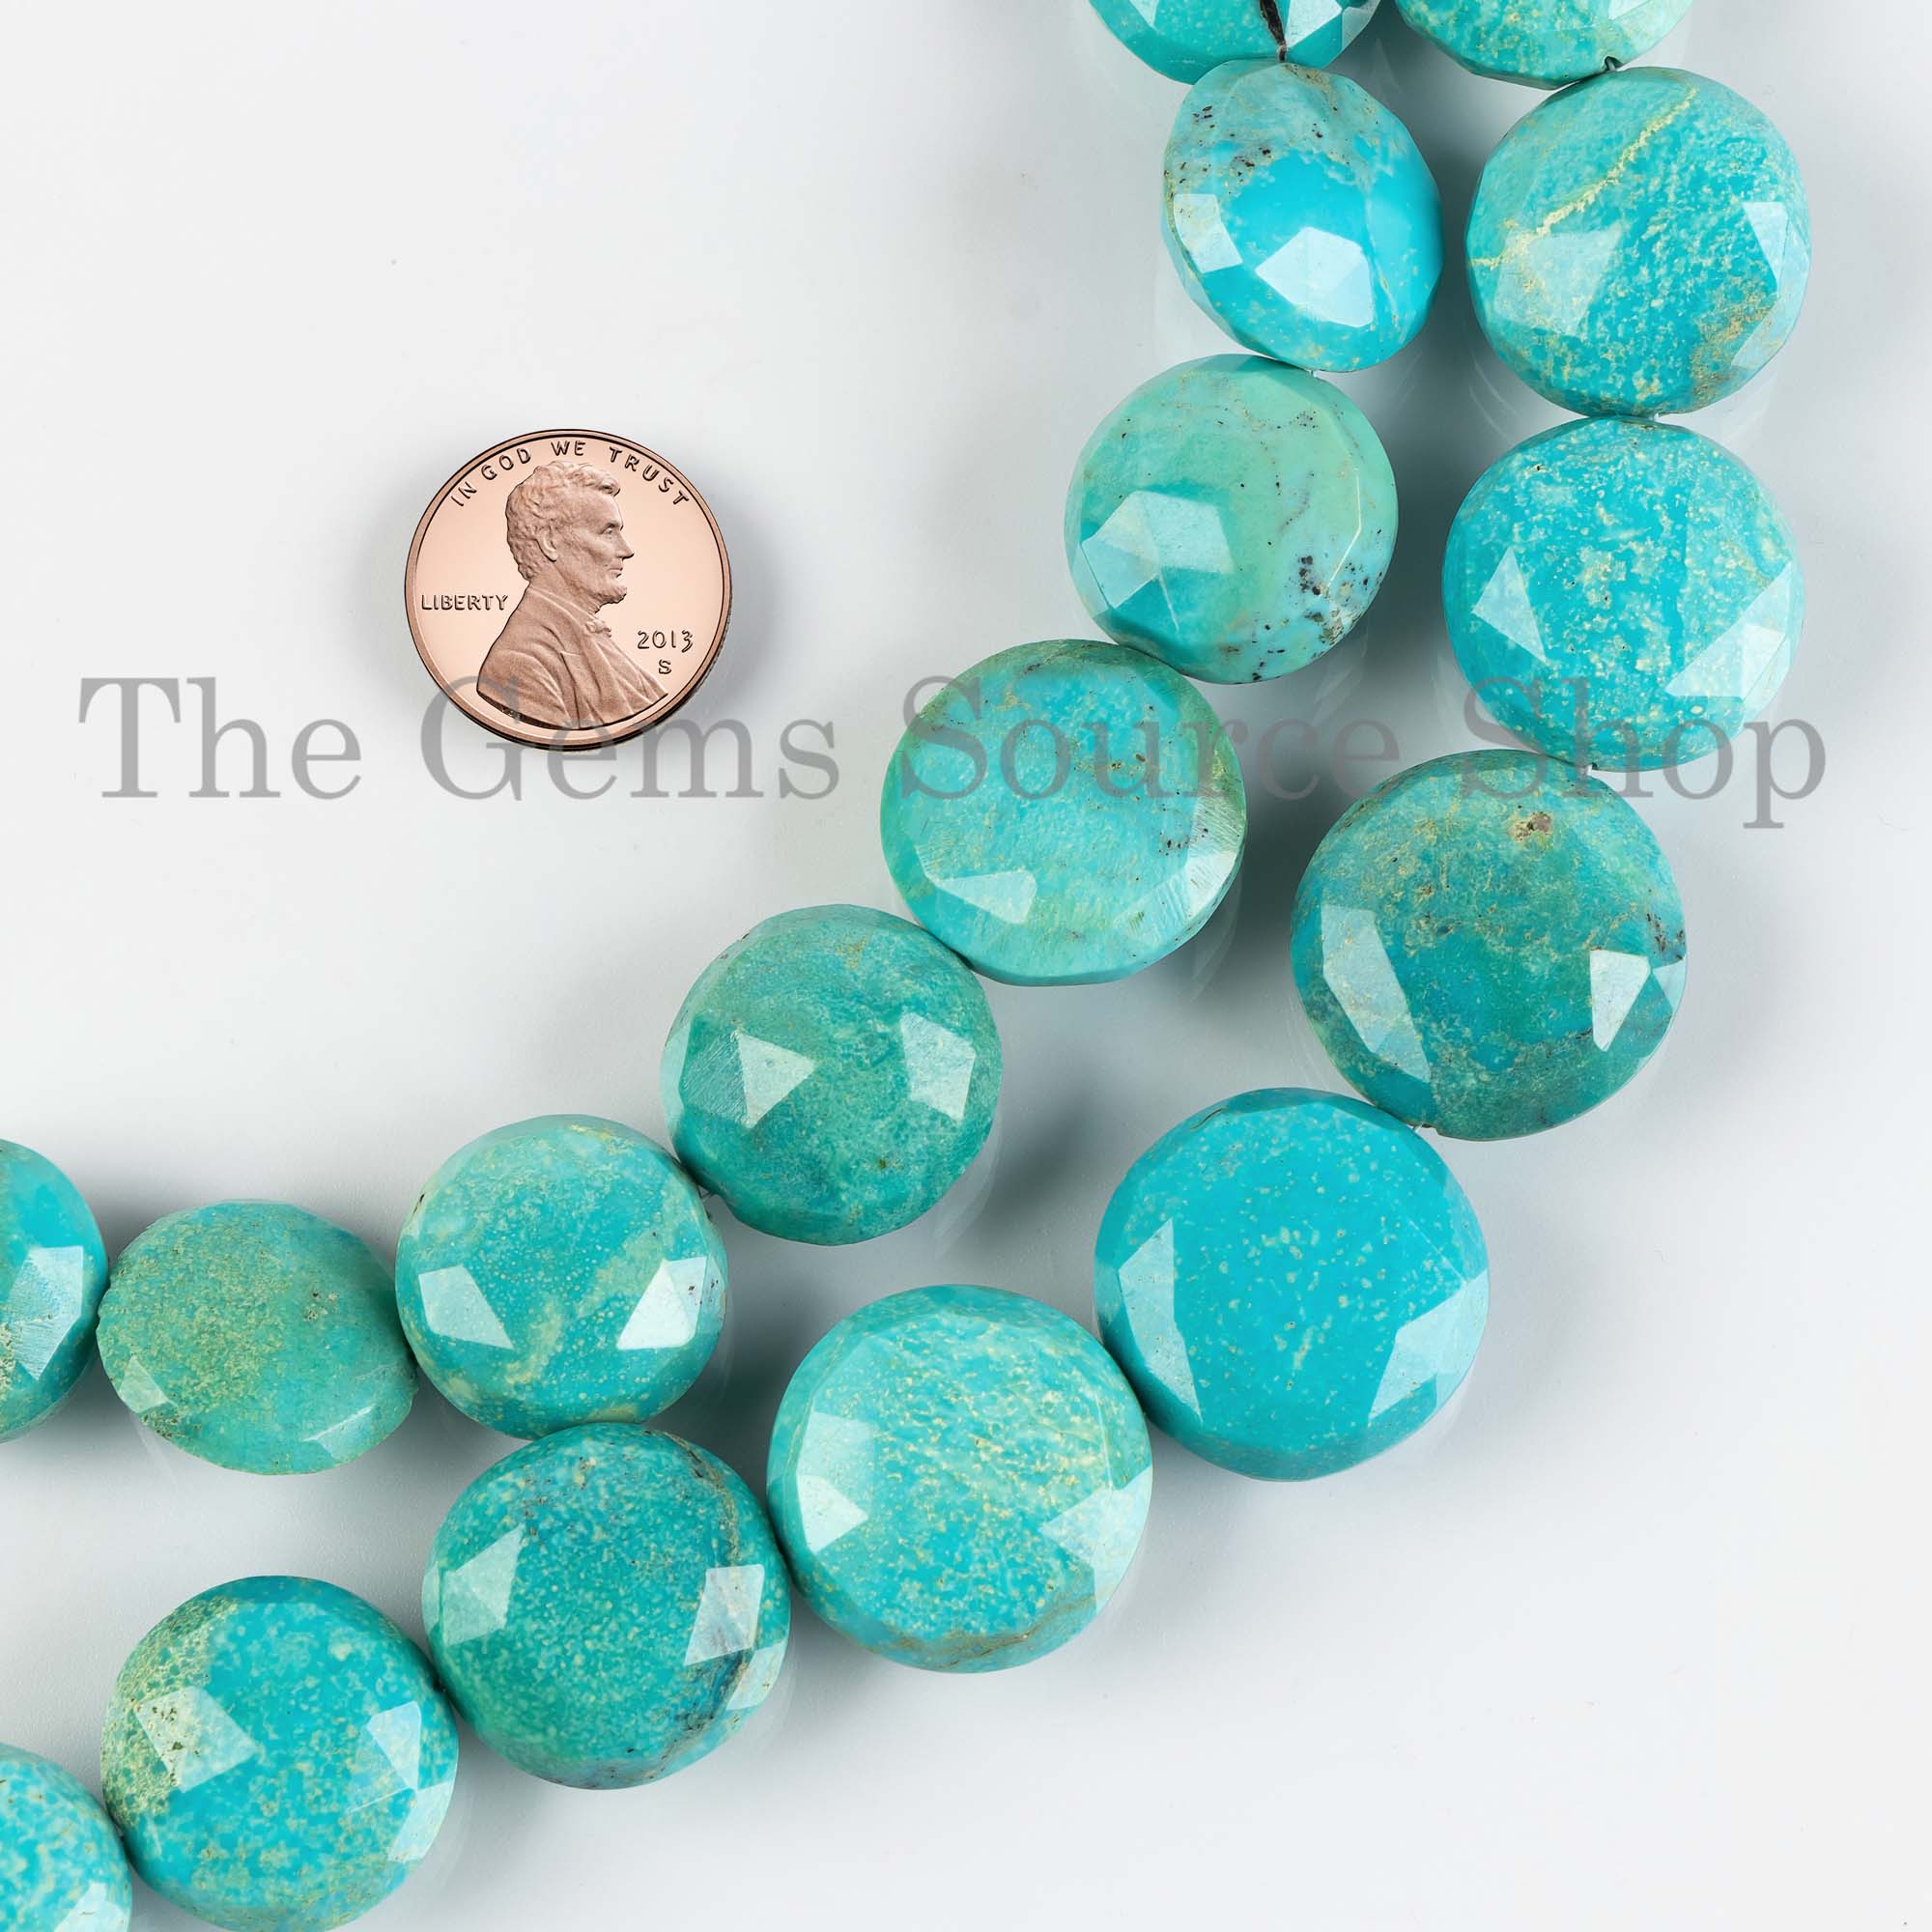 Turquoise Round Coin Beads, 16-22mm Turquoise Round Beads, Faceted Turquoise Beads, Turquoise Briolette Beads, Turquoise Coin Beads